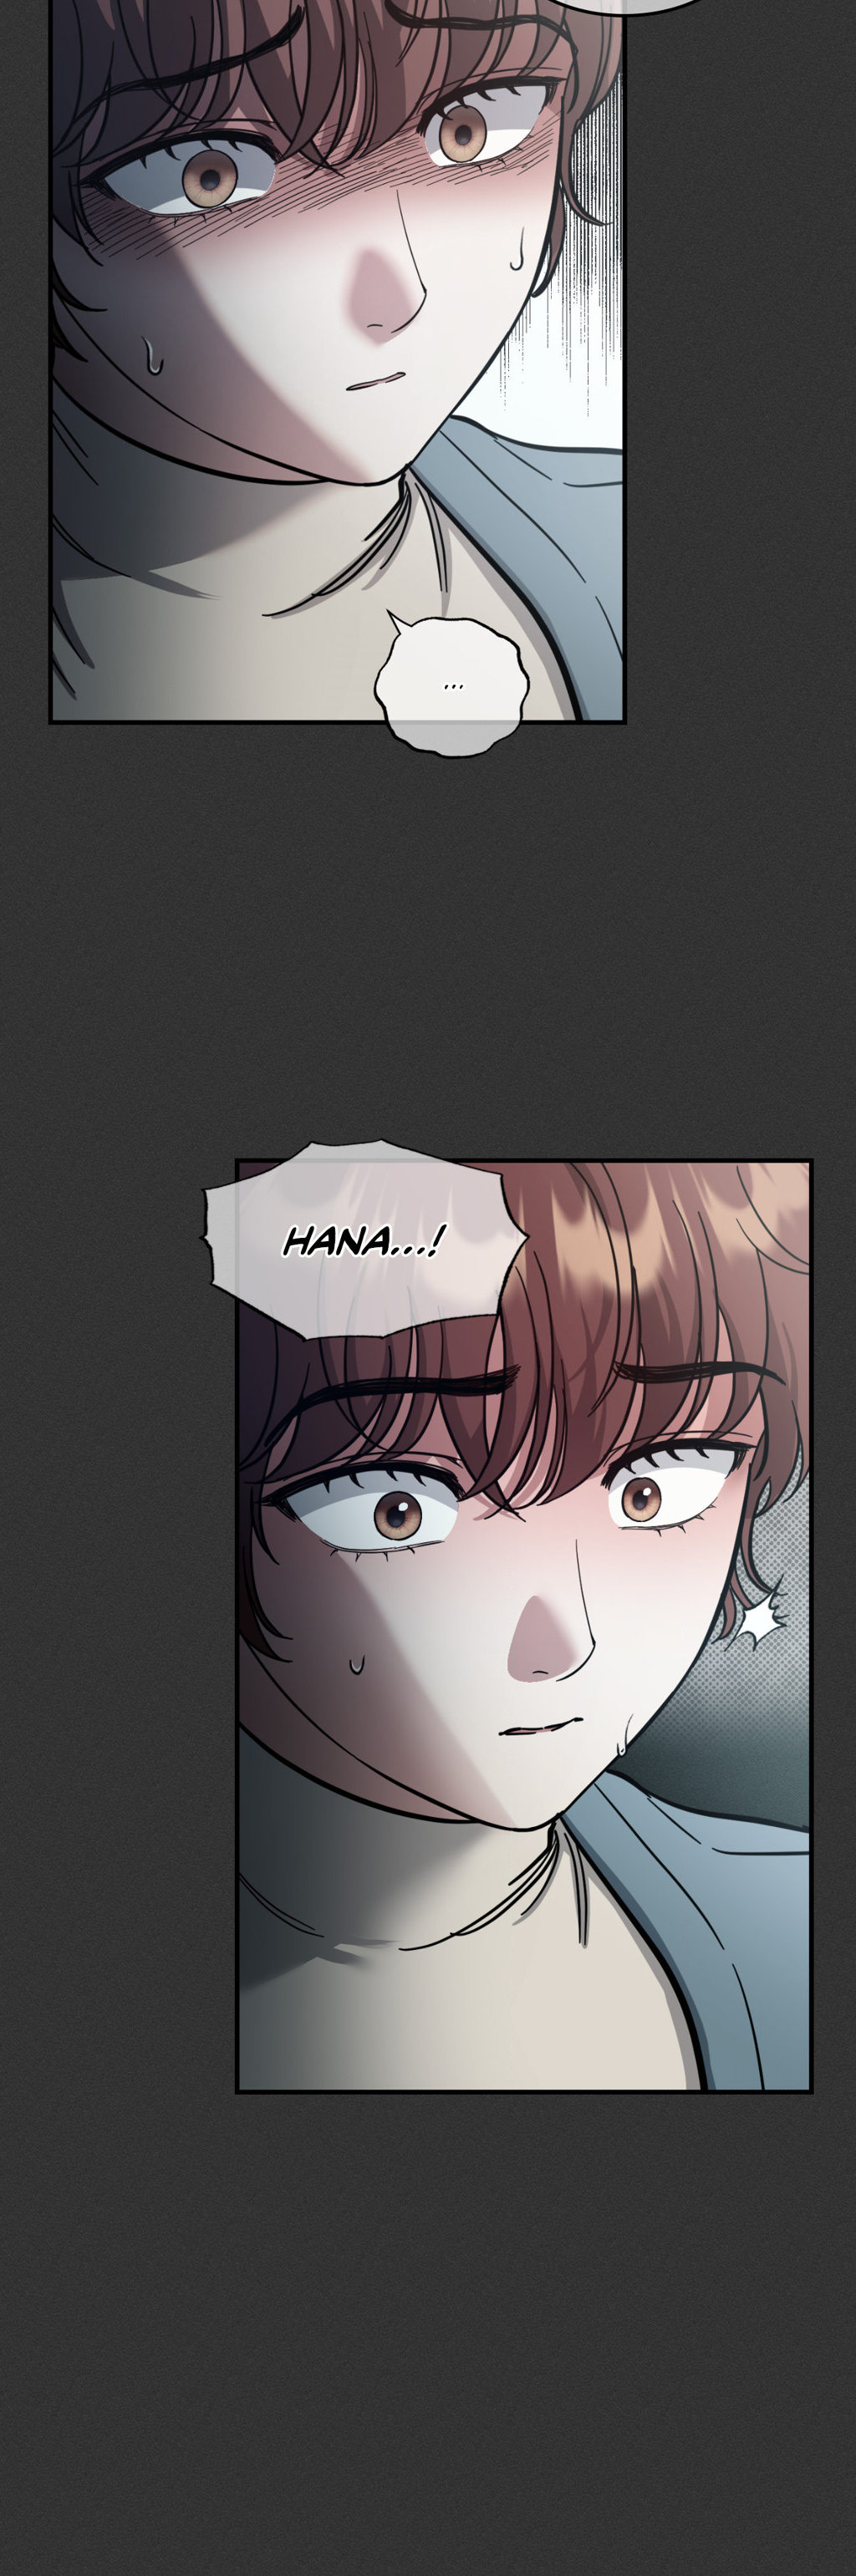 Hana’s Demons of Lust - Chapter 76 Page 6